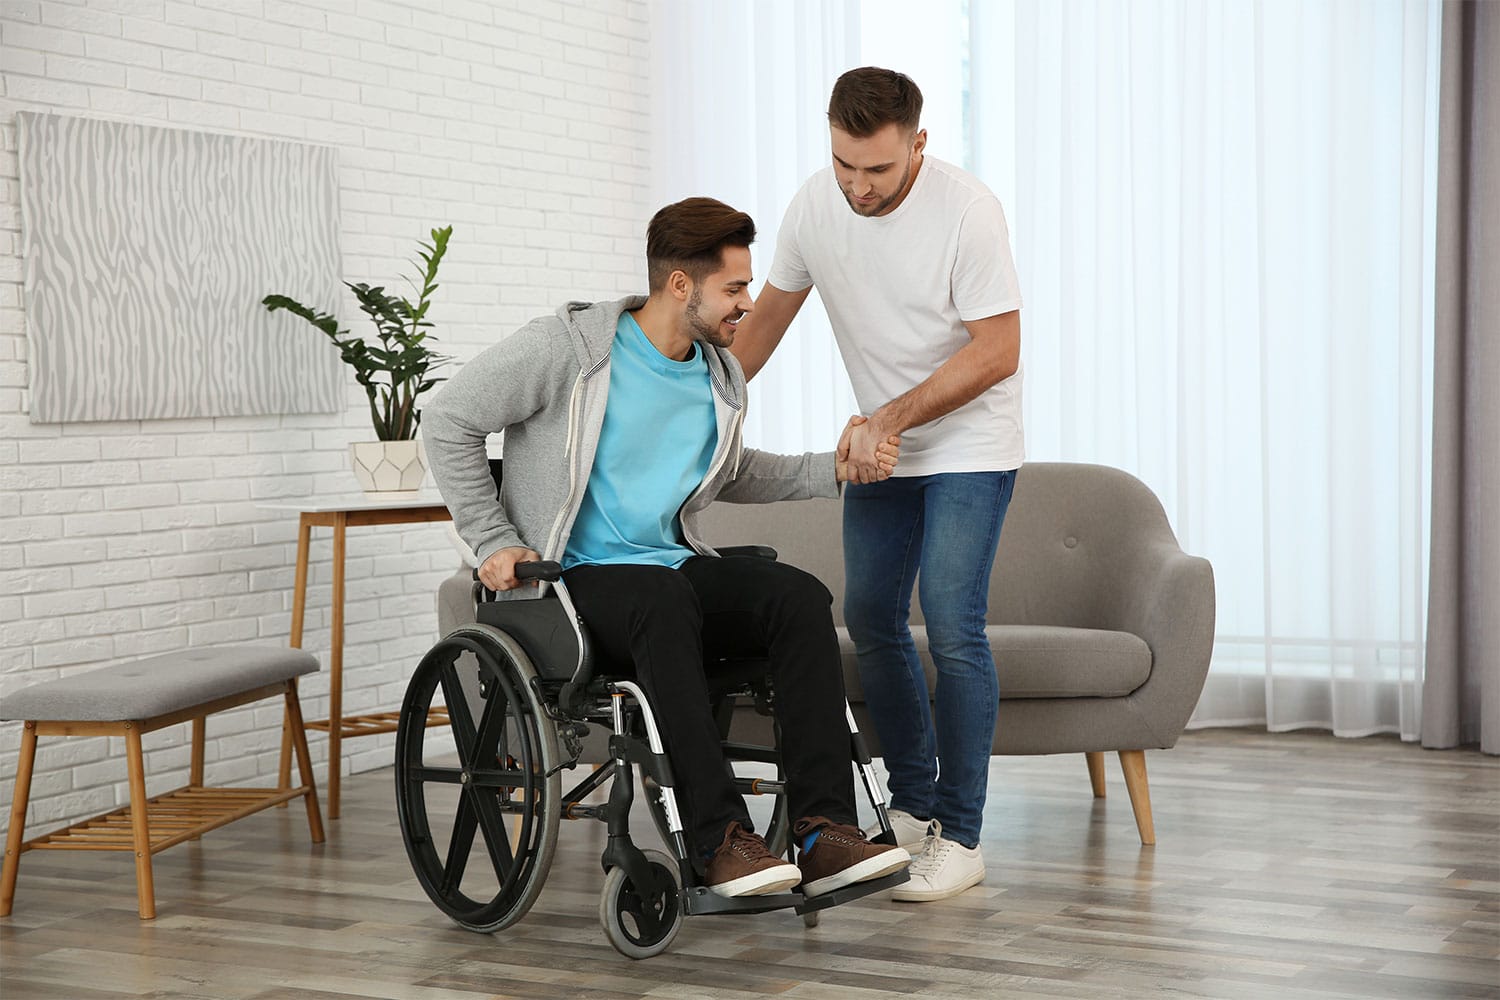 middle-aged adult with living with a disability receives help from a caregiver as he transitions from his wheelchair to a couch